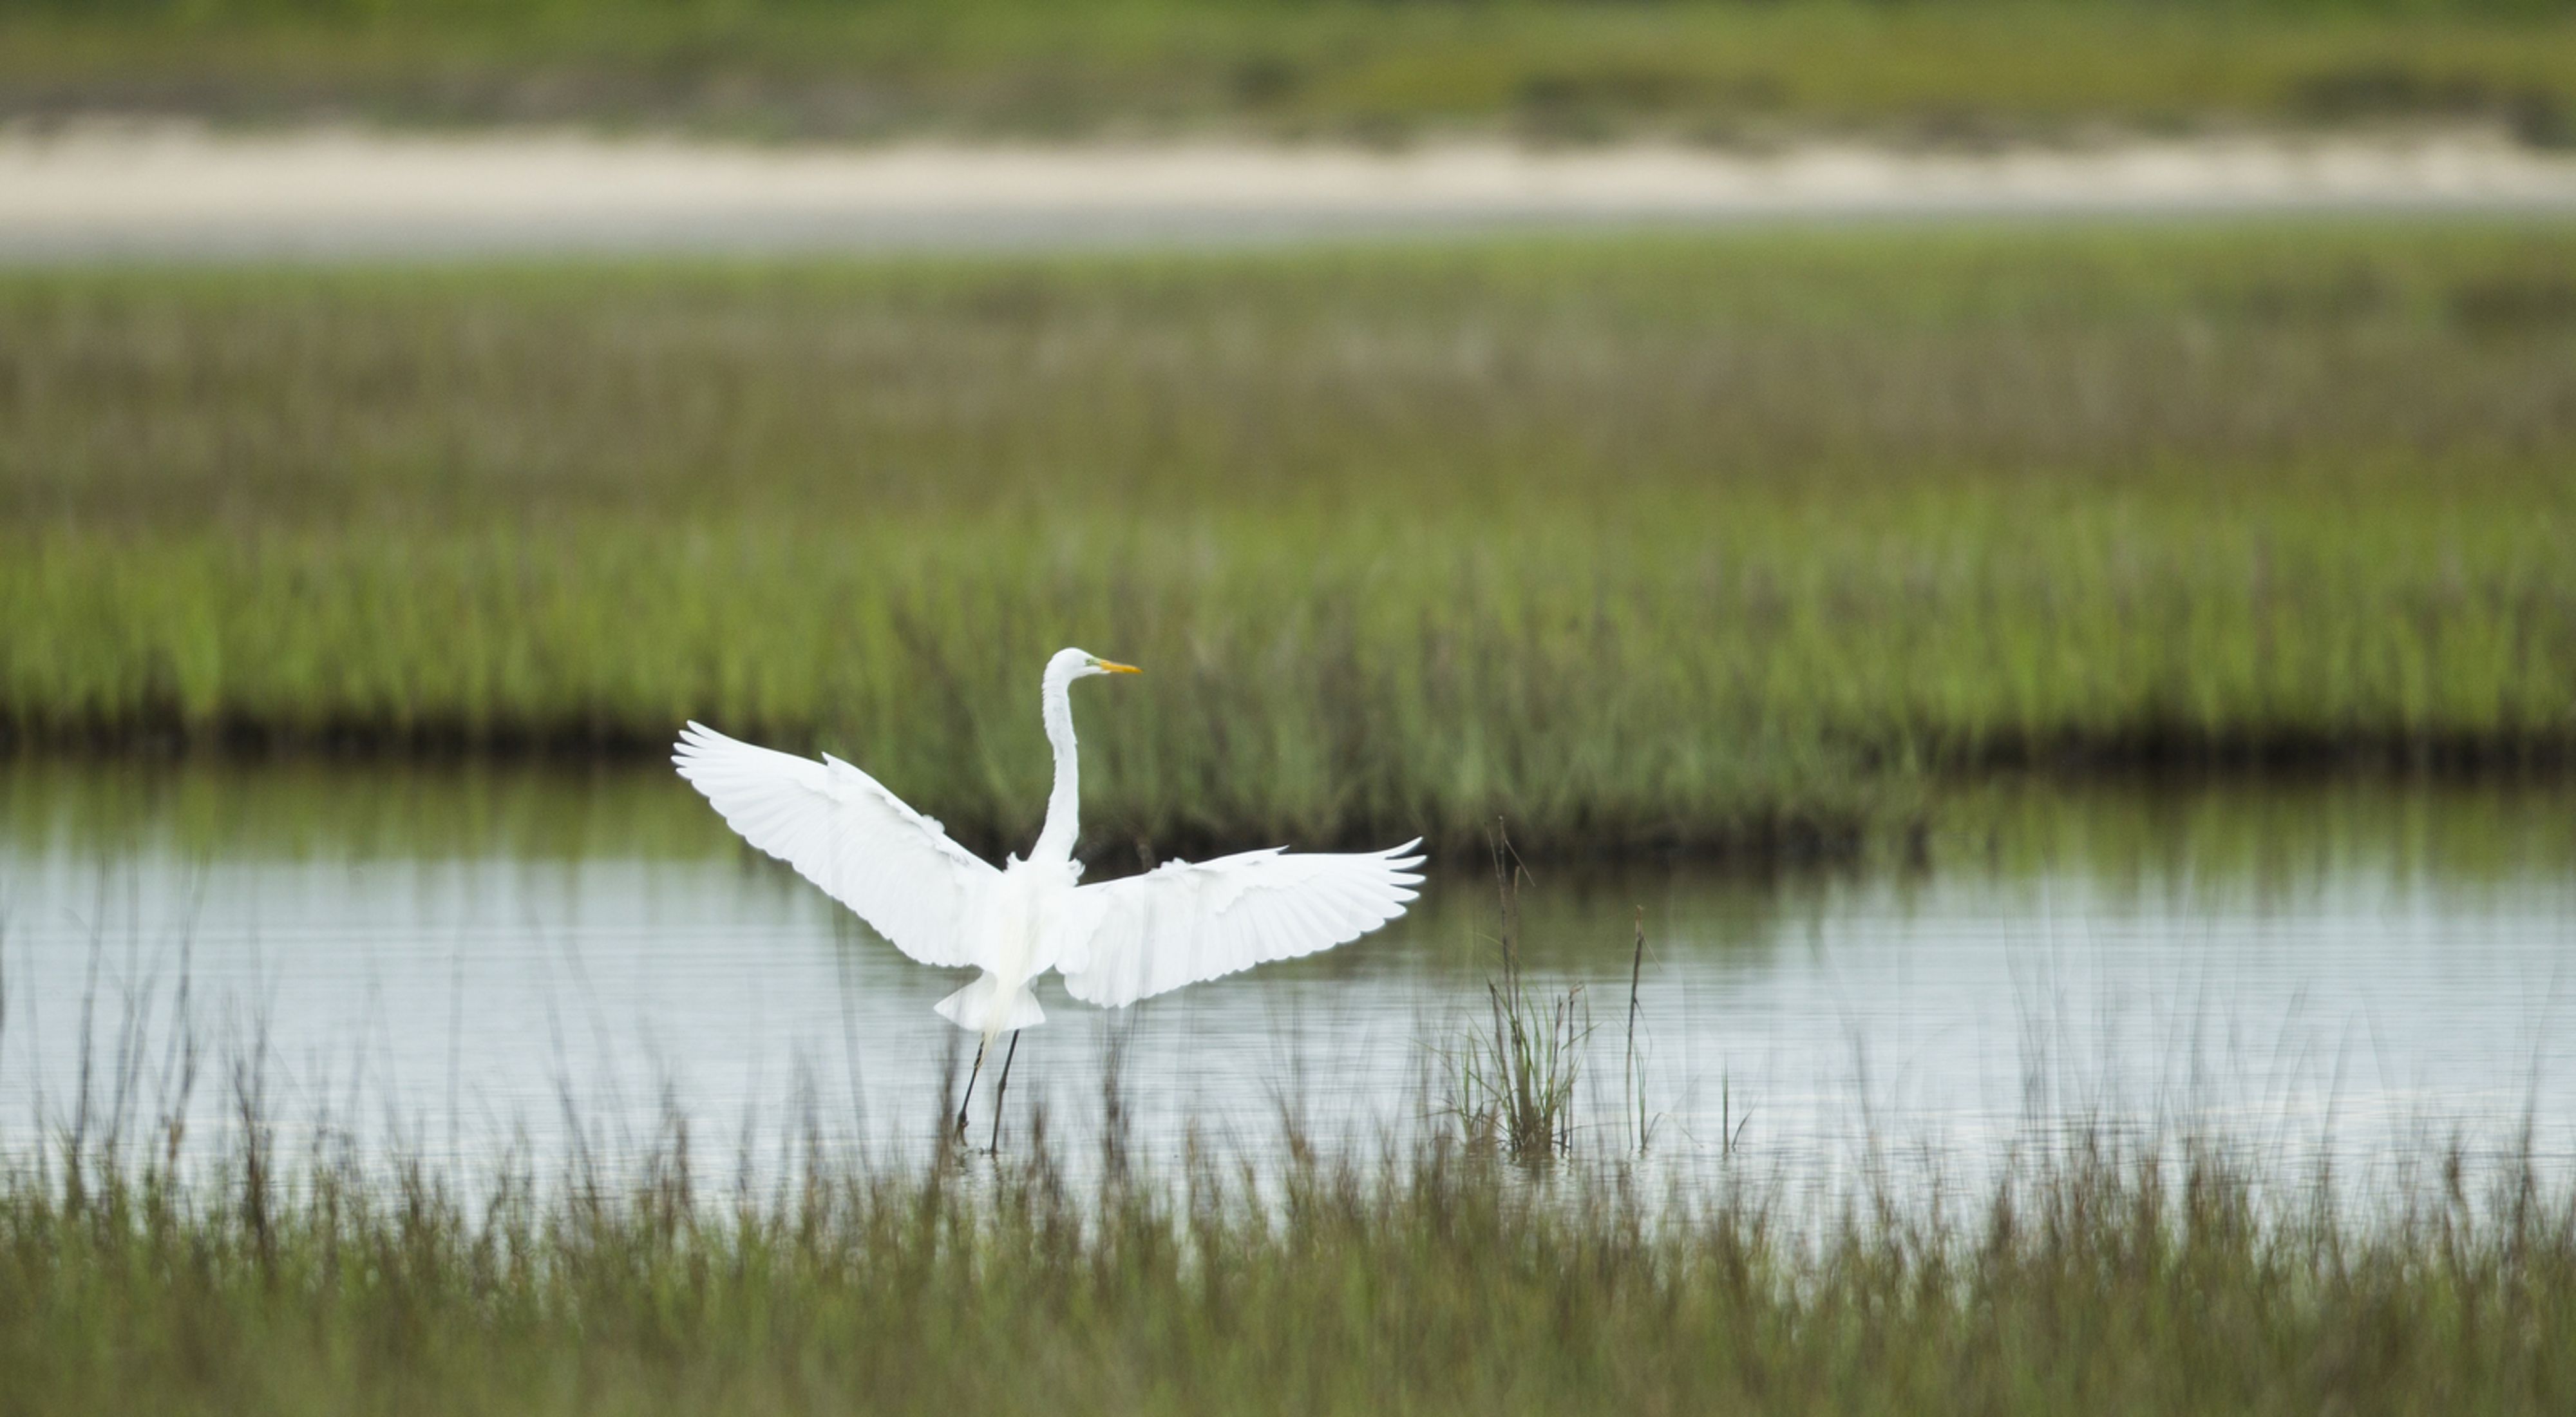 A large white birds spreads its wings while skimming across water surrounded by grasses.